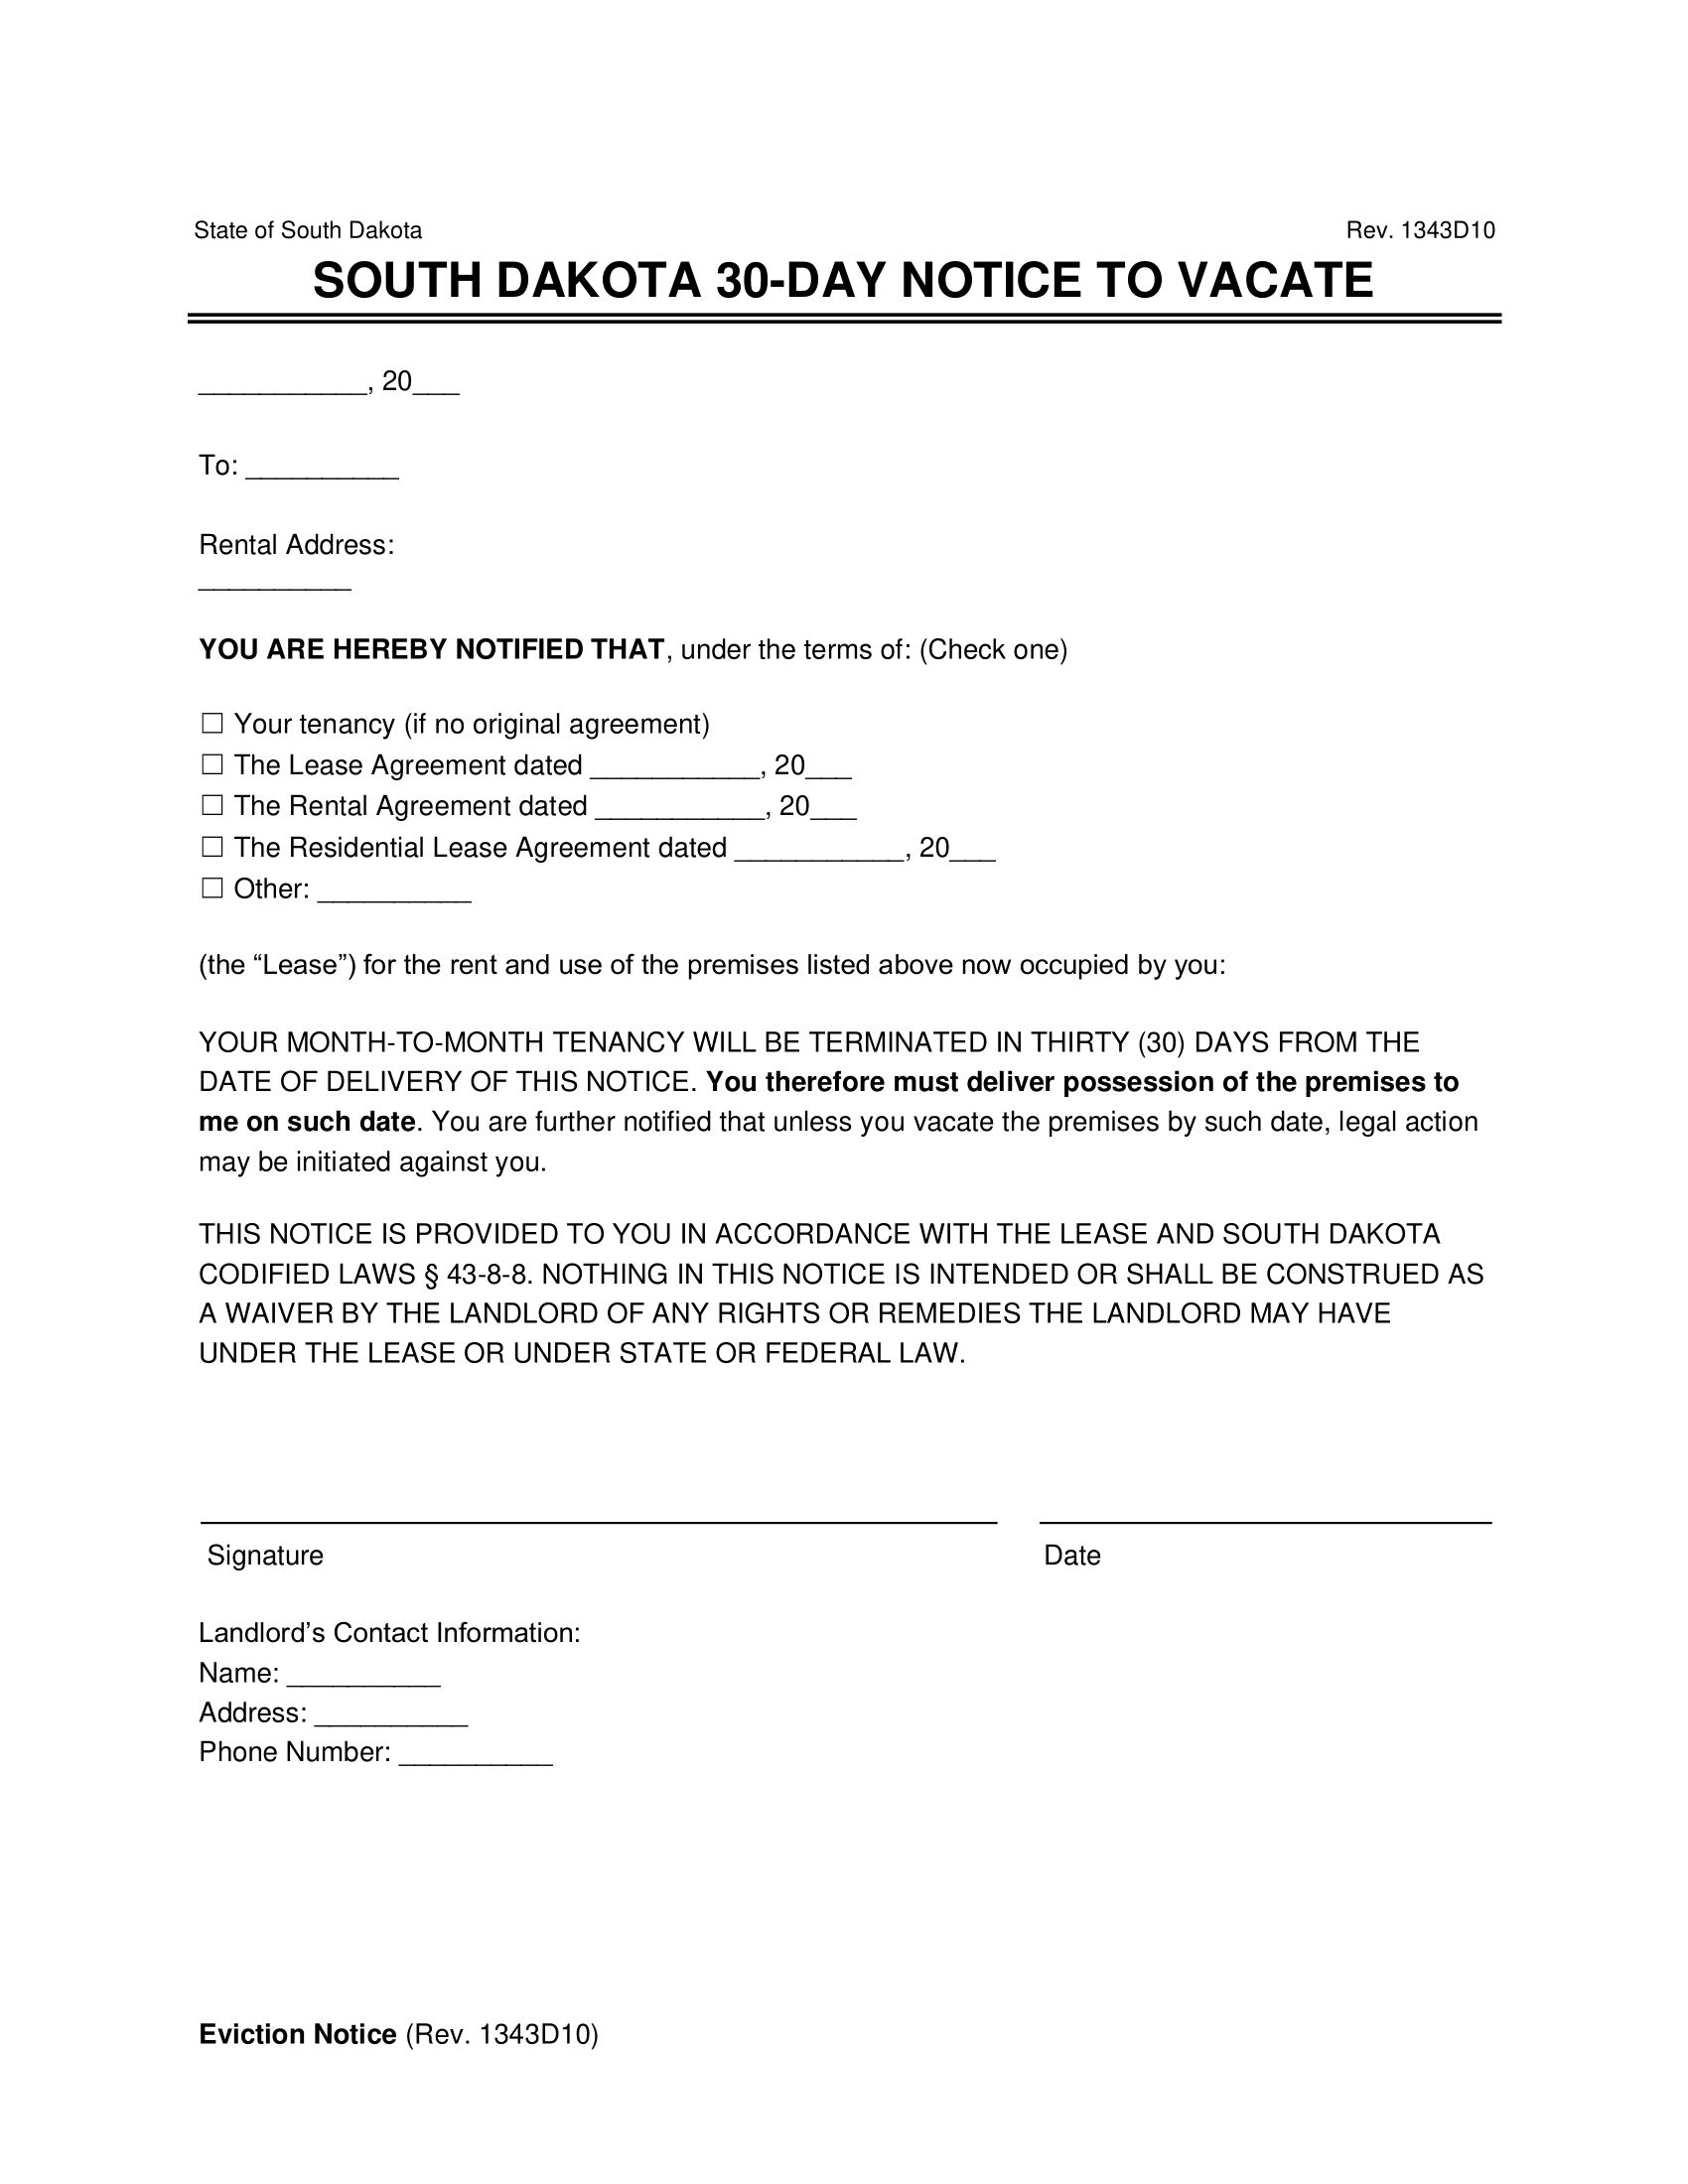 South Dakota 30-Day Notice to Vacate (Month-to-Month)